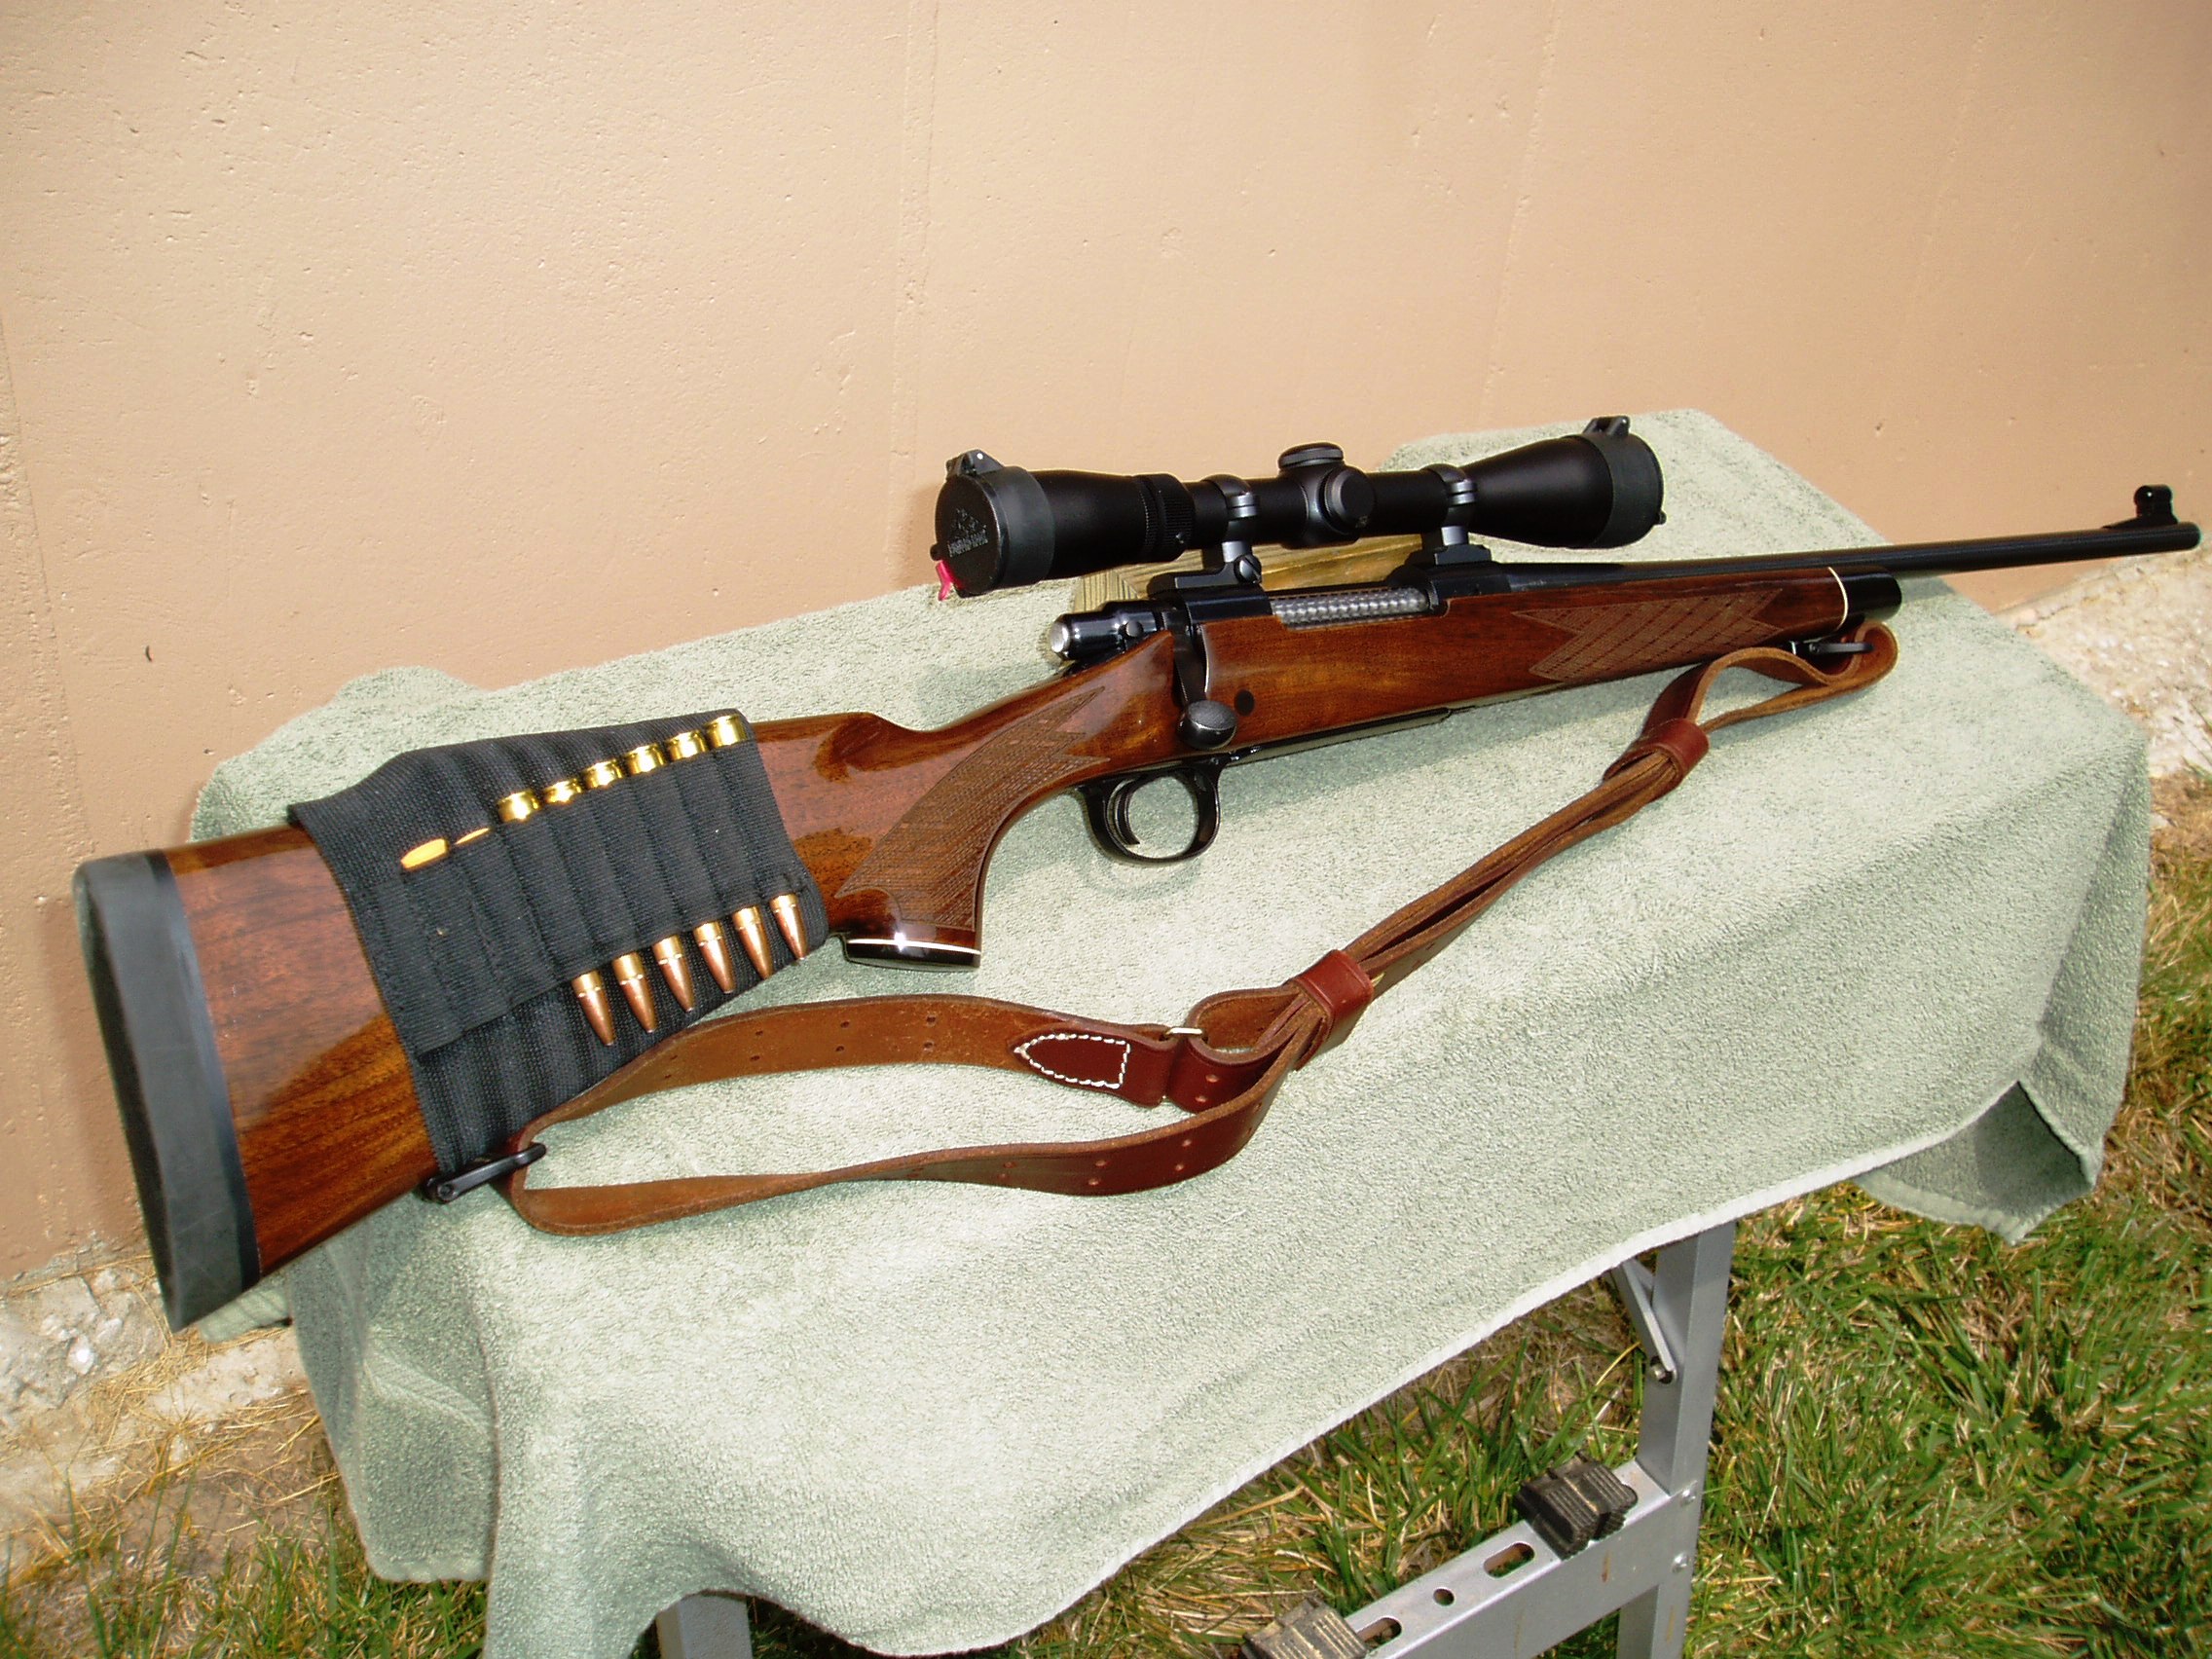 Remington Rifle Pics, Weapons Collection